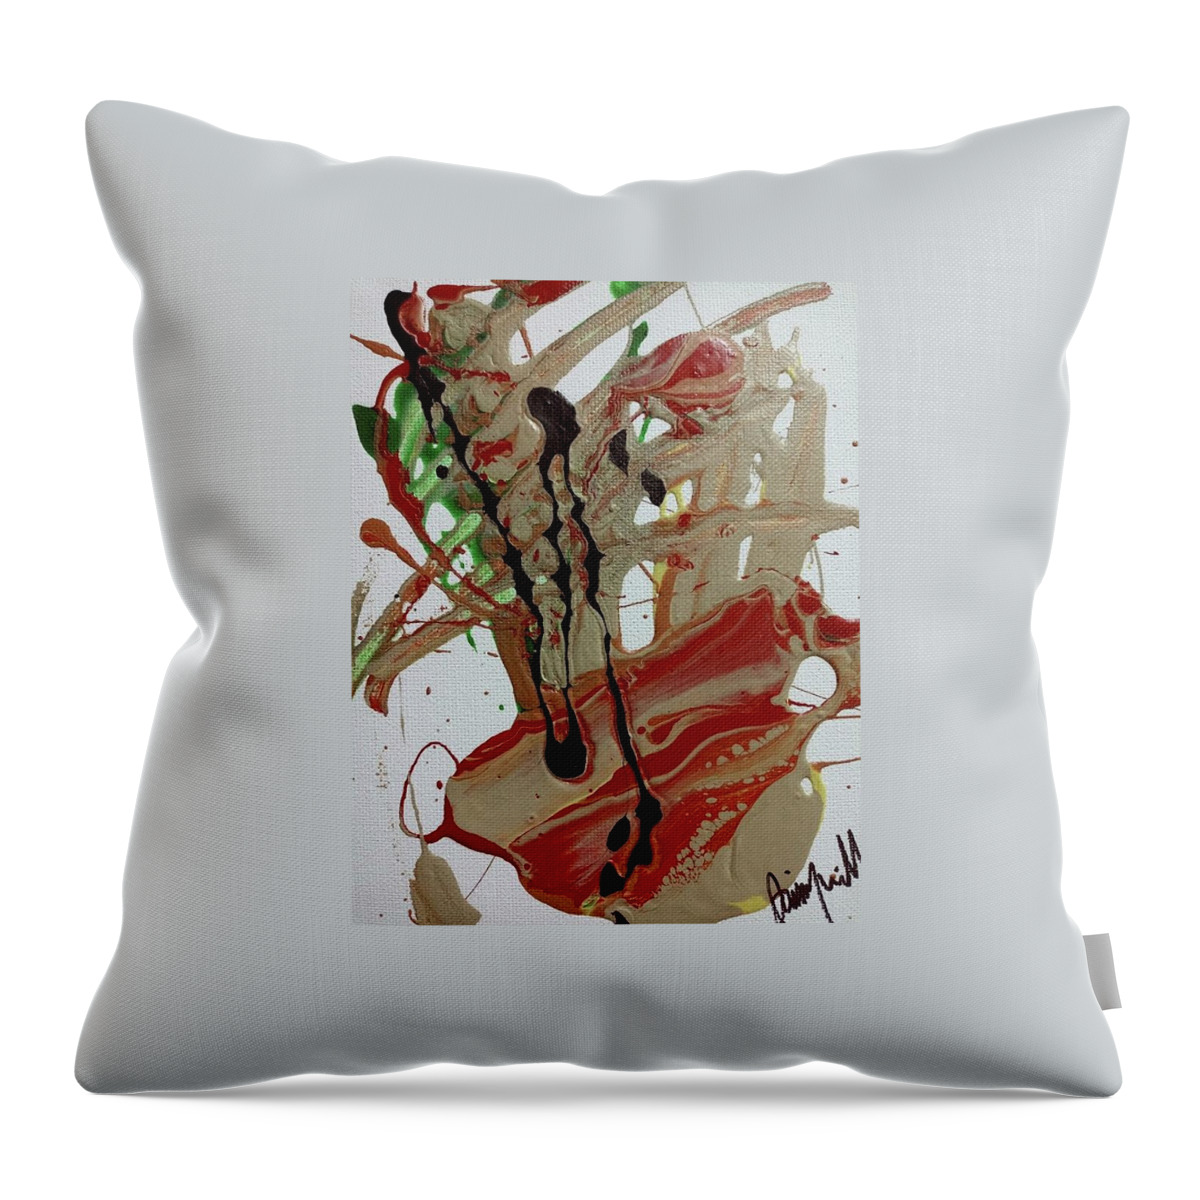  Throw Pillow featuring the painting Between by Jimmy Williams